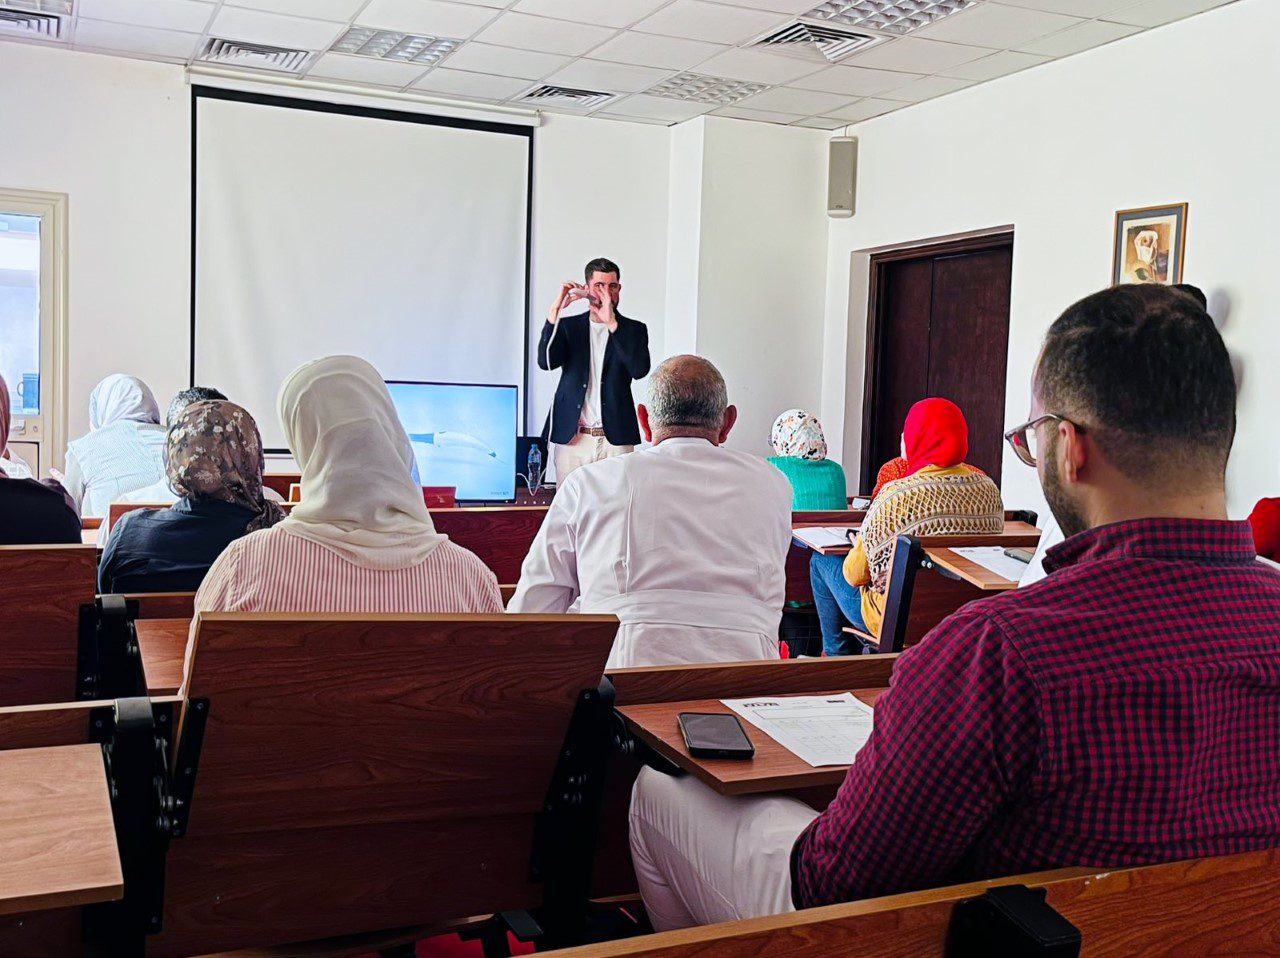 Workshops organized by the Continuing Education Unit at the Faculty of Dentistry, Nahda University